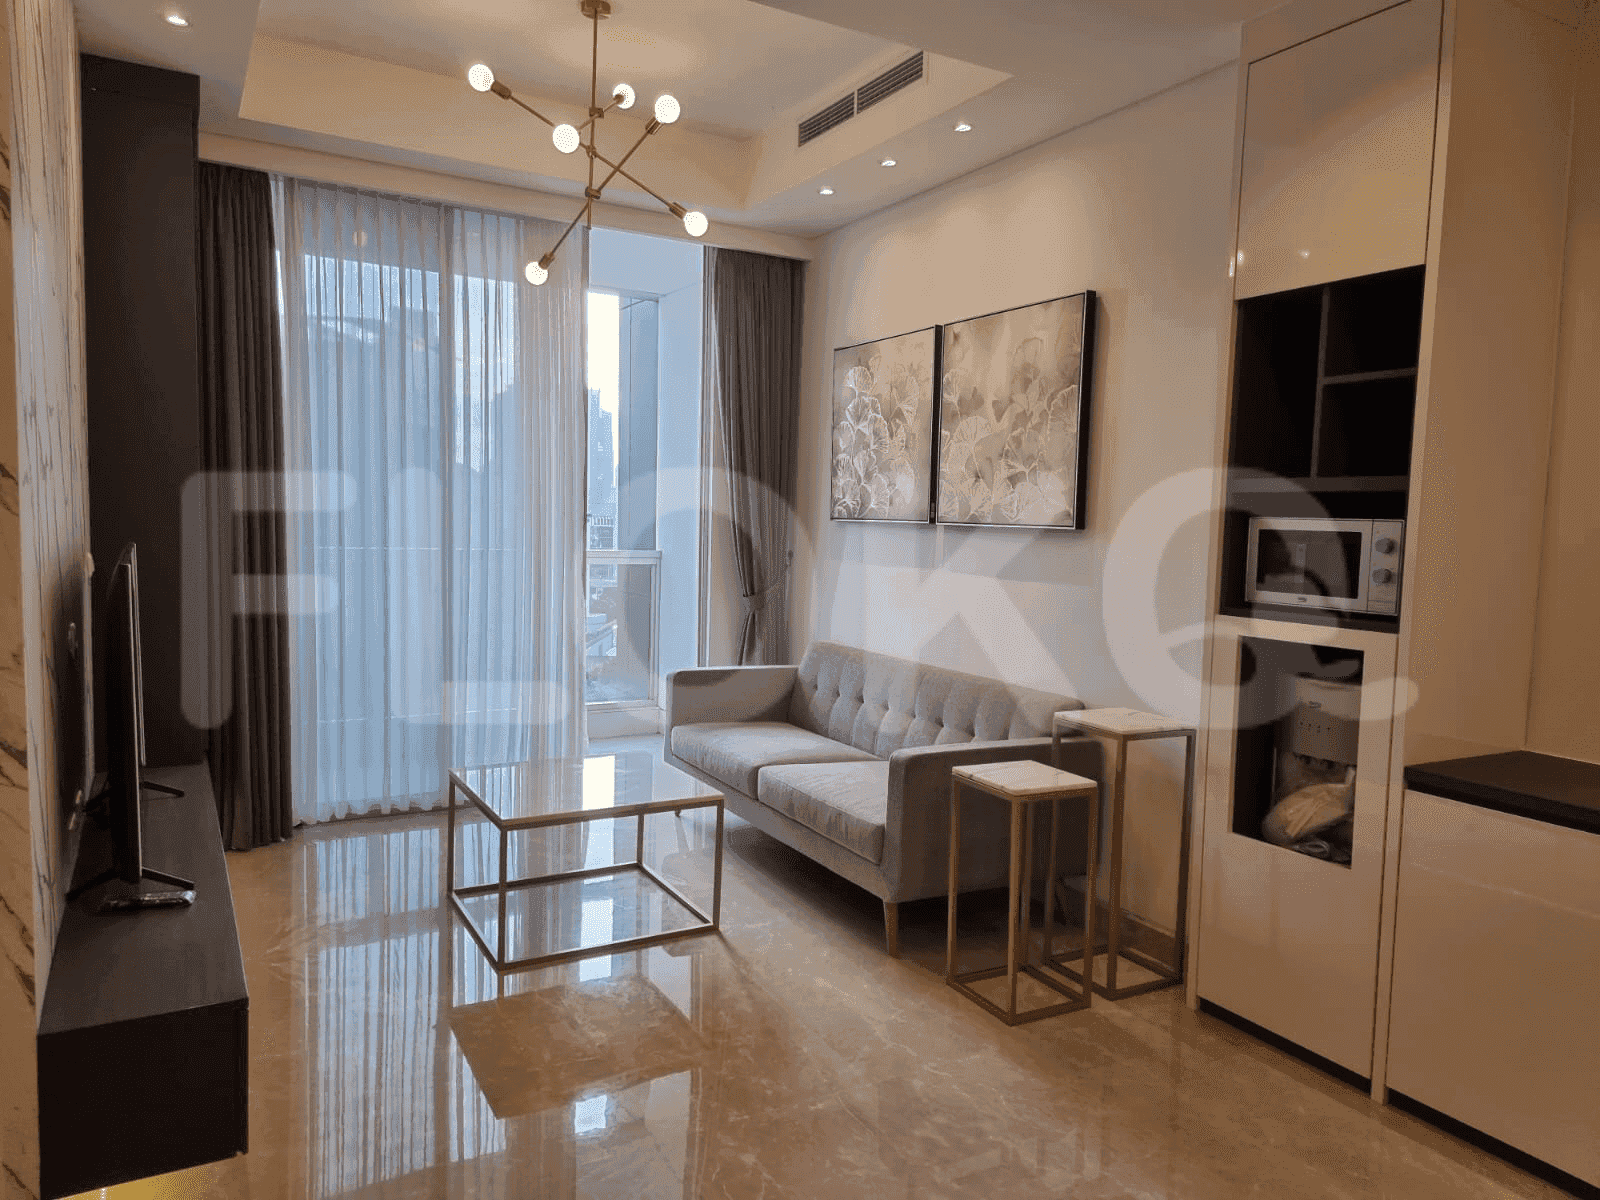 2 Bedroom on 20th Floor for Rent in The Elements Kuningan Apartment - fkuc89 1